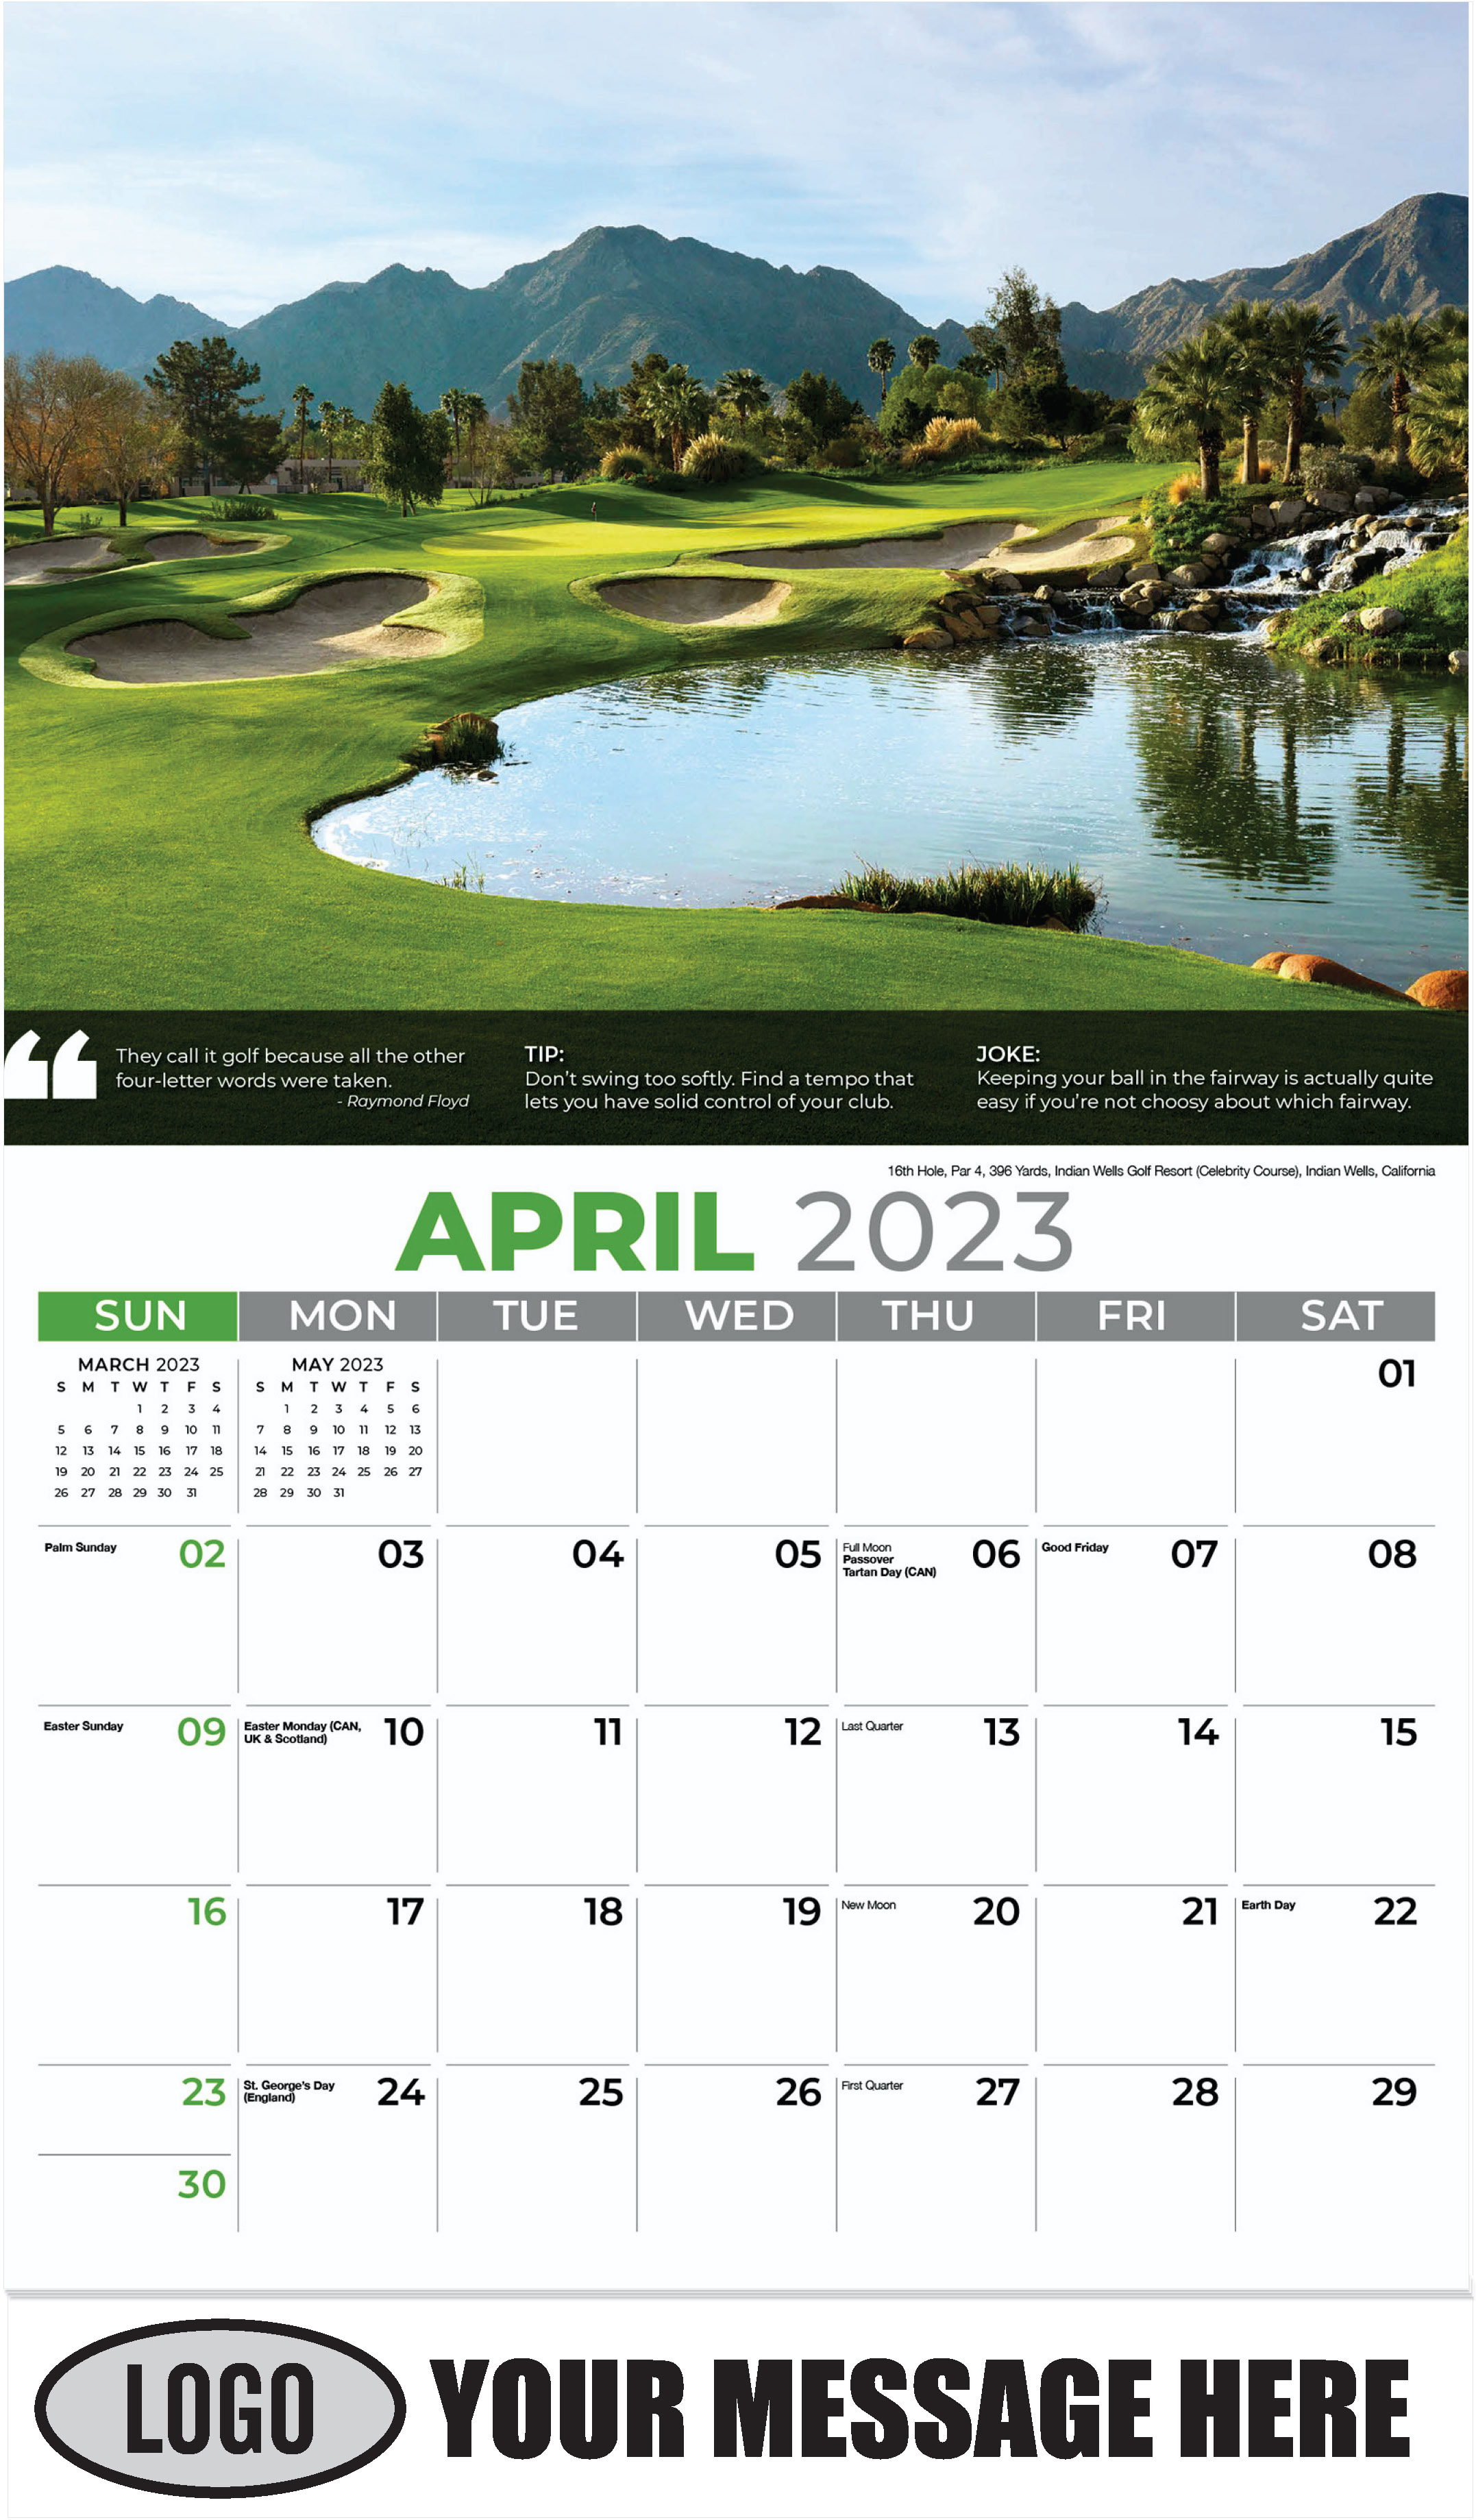 16th Hole, Par 4, 396 Yards, Indian Wells Golf Resort (Celebrity Course), Indian Wells, California - April - Golf Tips  (Tips, Quips and Holes) 2023 Promotional Calendar